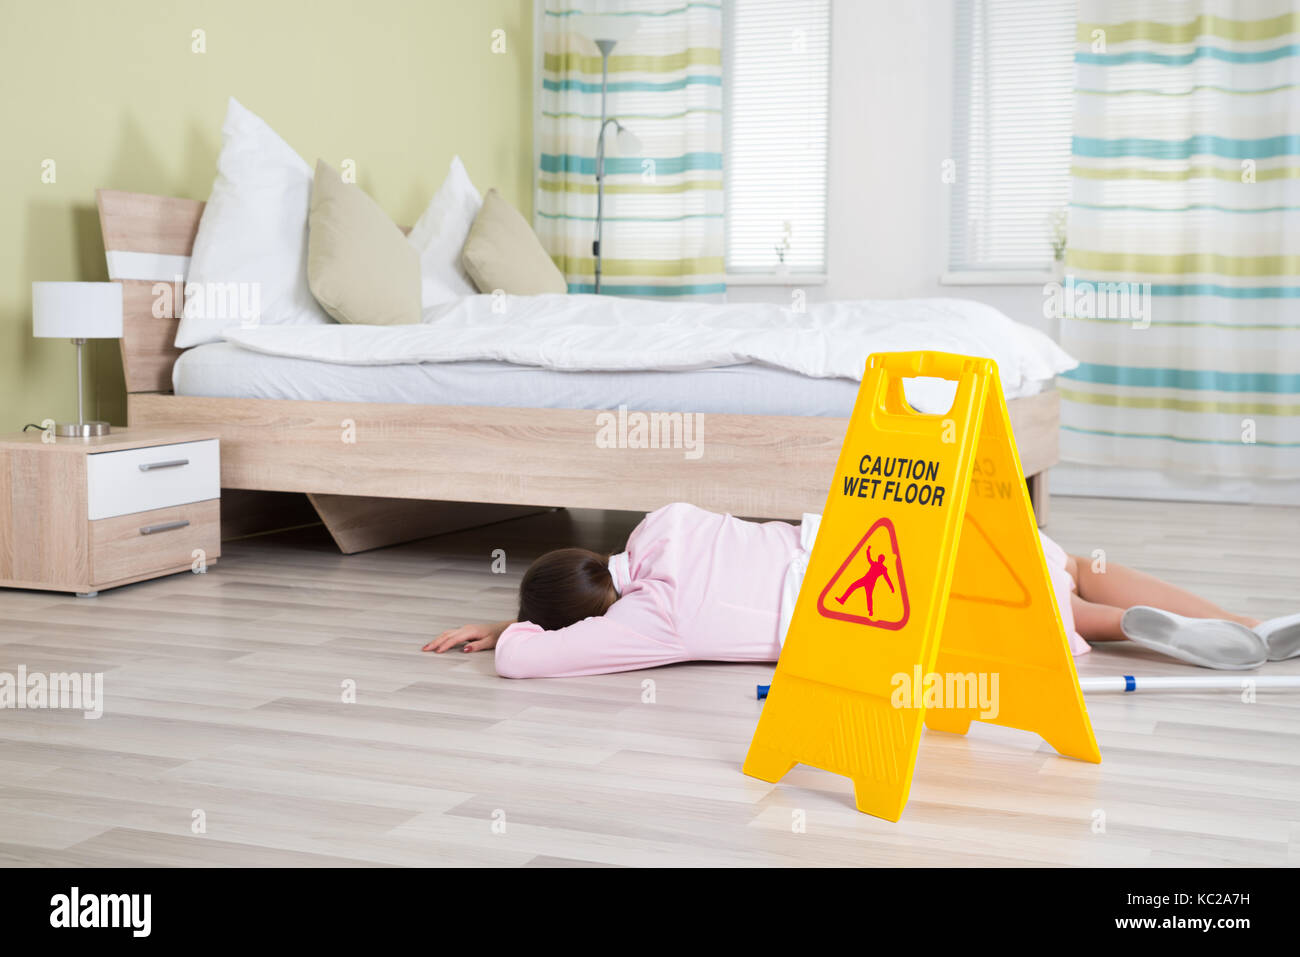 Young Female Housekeeper Unconscious Near Wet Floor Sign In Hotel Room Stock Photo